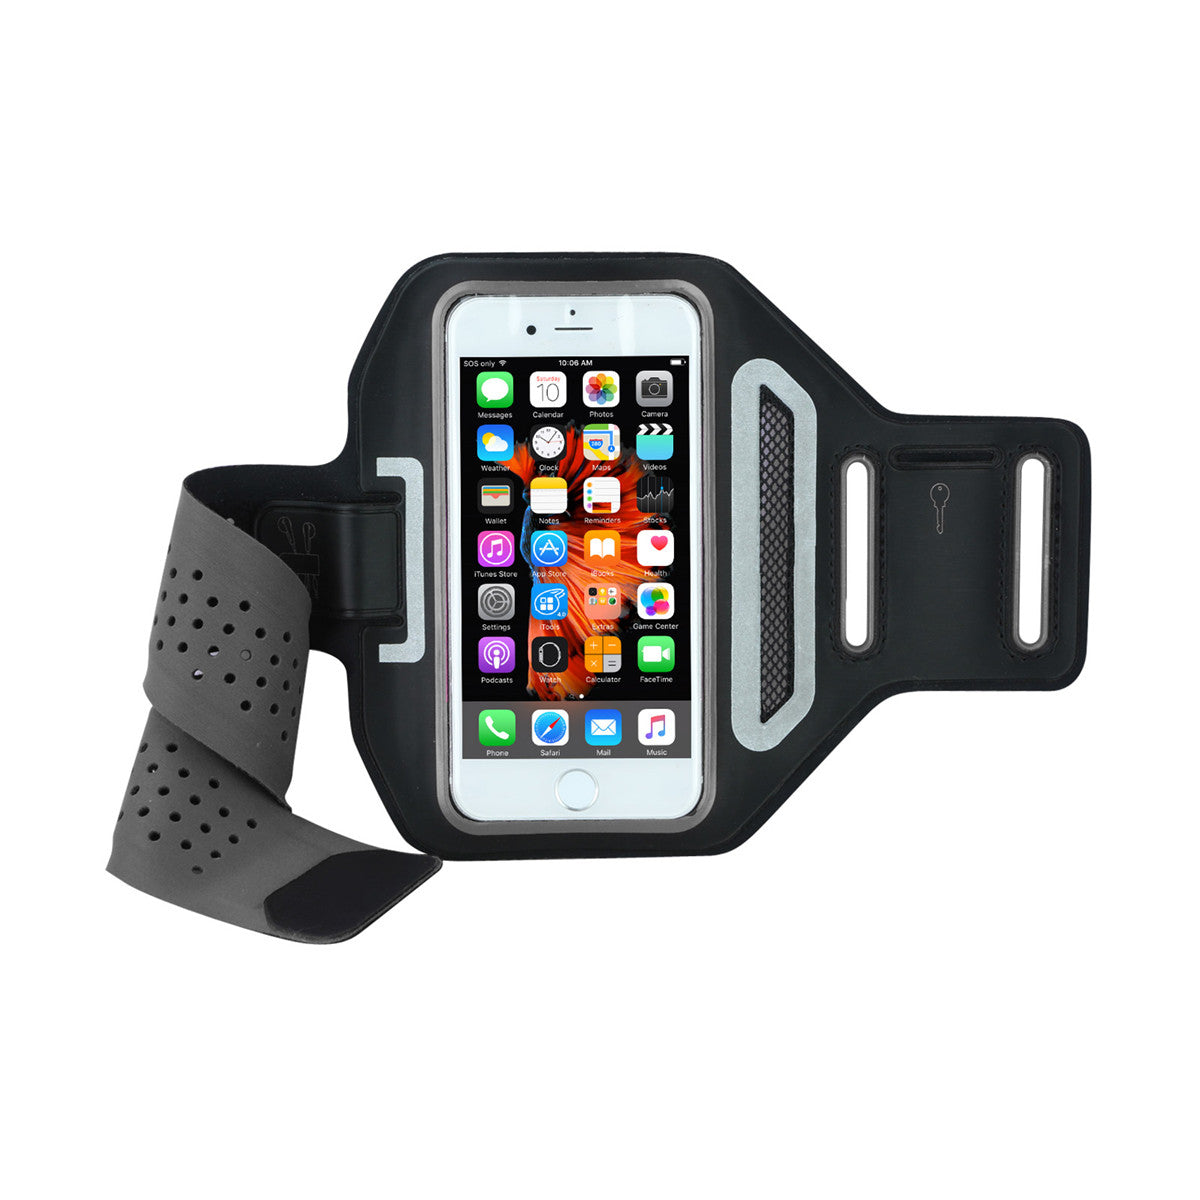 Mobile Mob Airvent Gym Running Armband For Apple iPhone X 8 7 6S 6 SE 5S (Upto 4.7") Black  